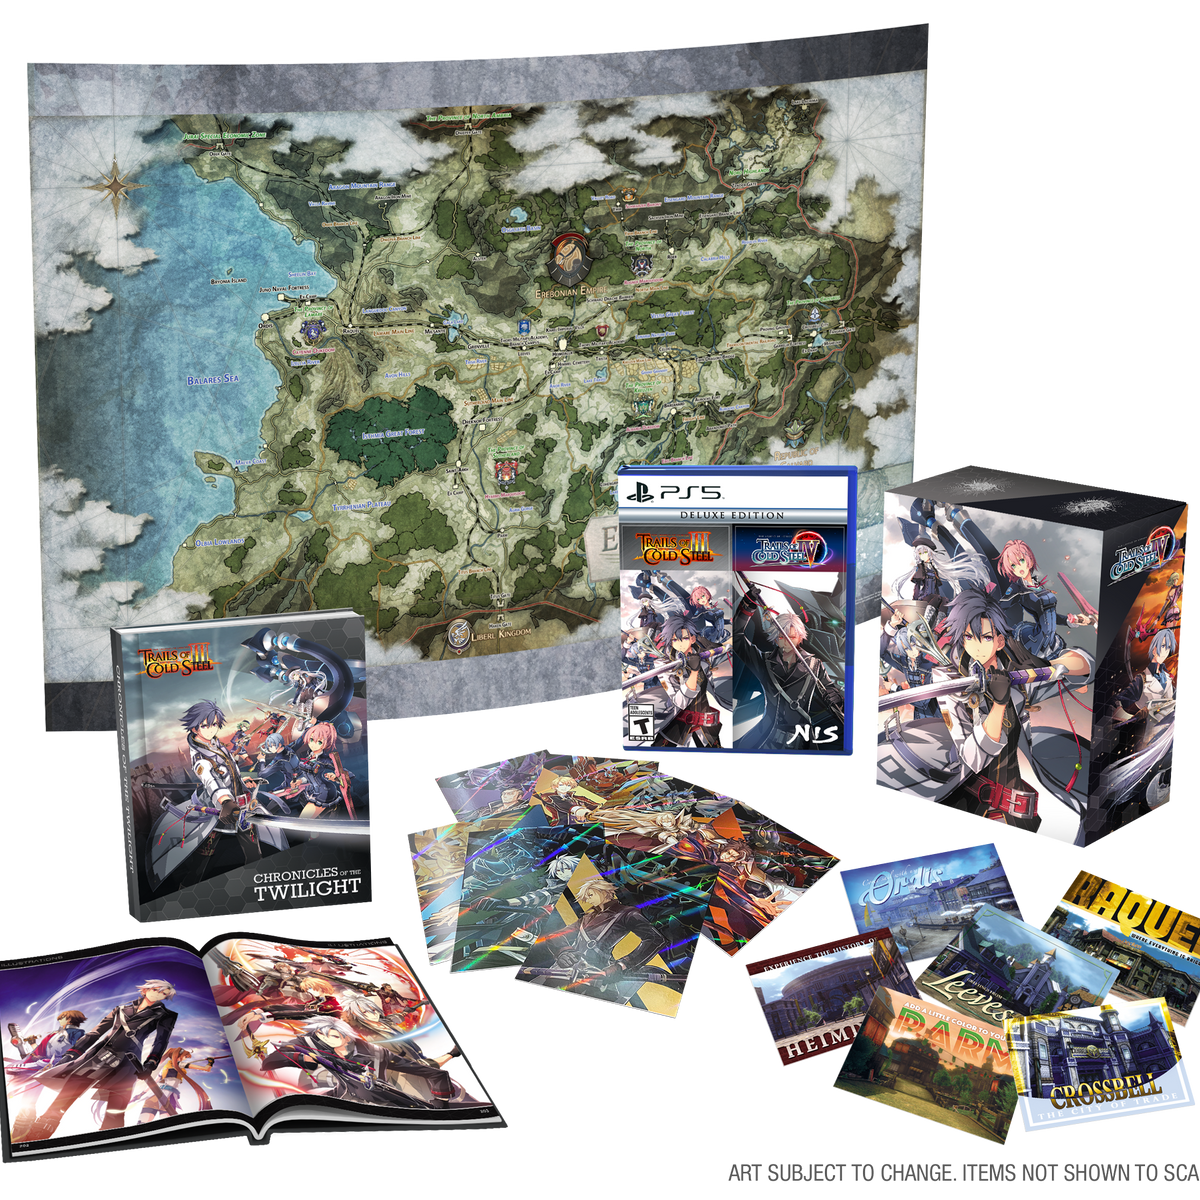 The Legend of Heroes: Trails of Cold Steel III / The Legend of Heroes